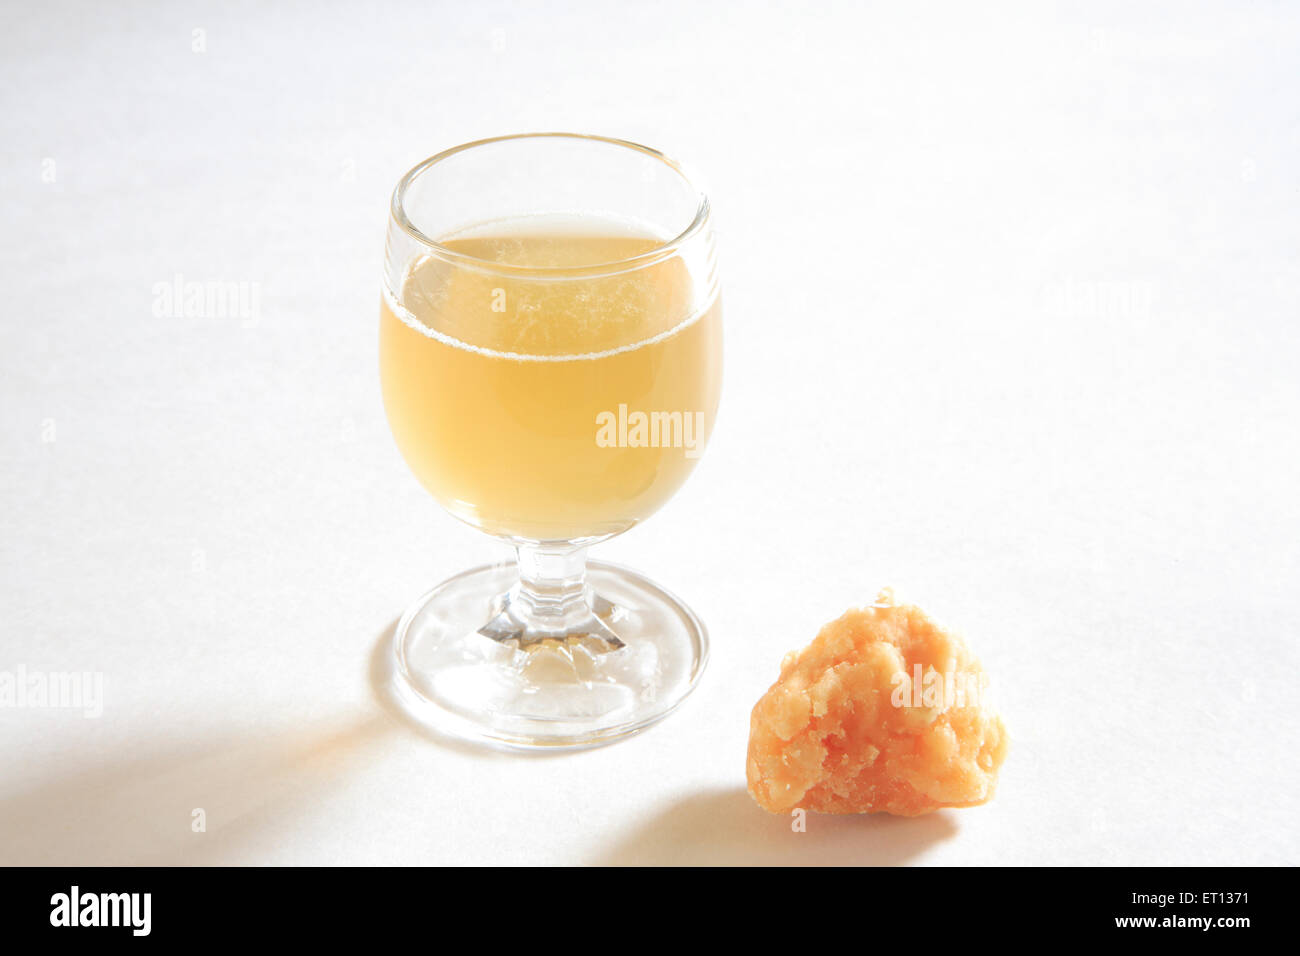 Cold drink ; jaggery juice ; Saccharum Officinarum ; India Stock Photo